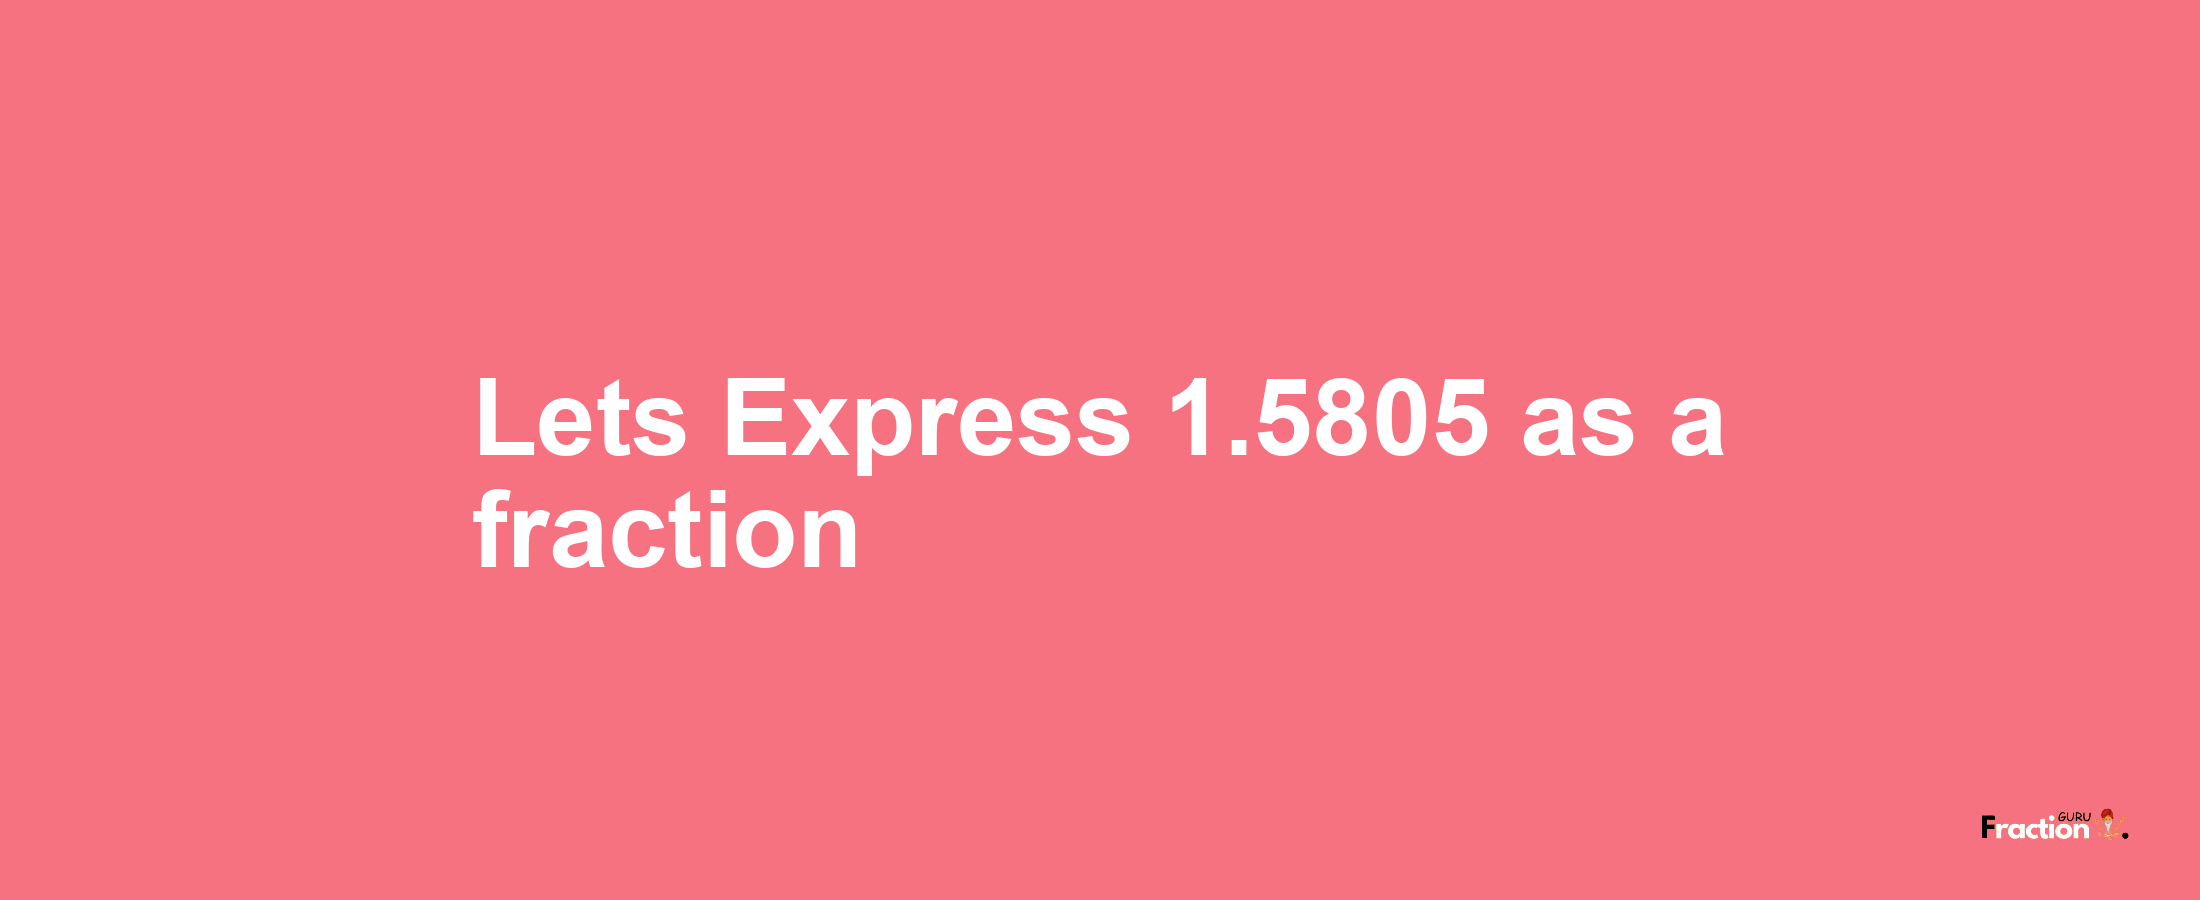 Lets Express 1.5805 as afraction